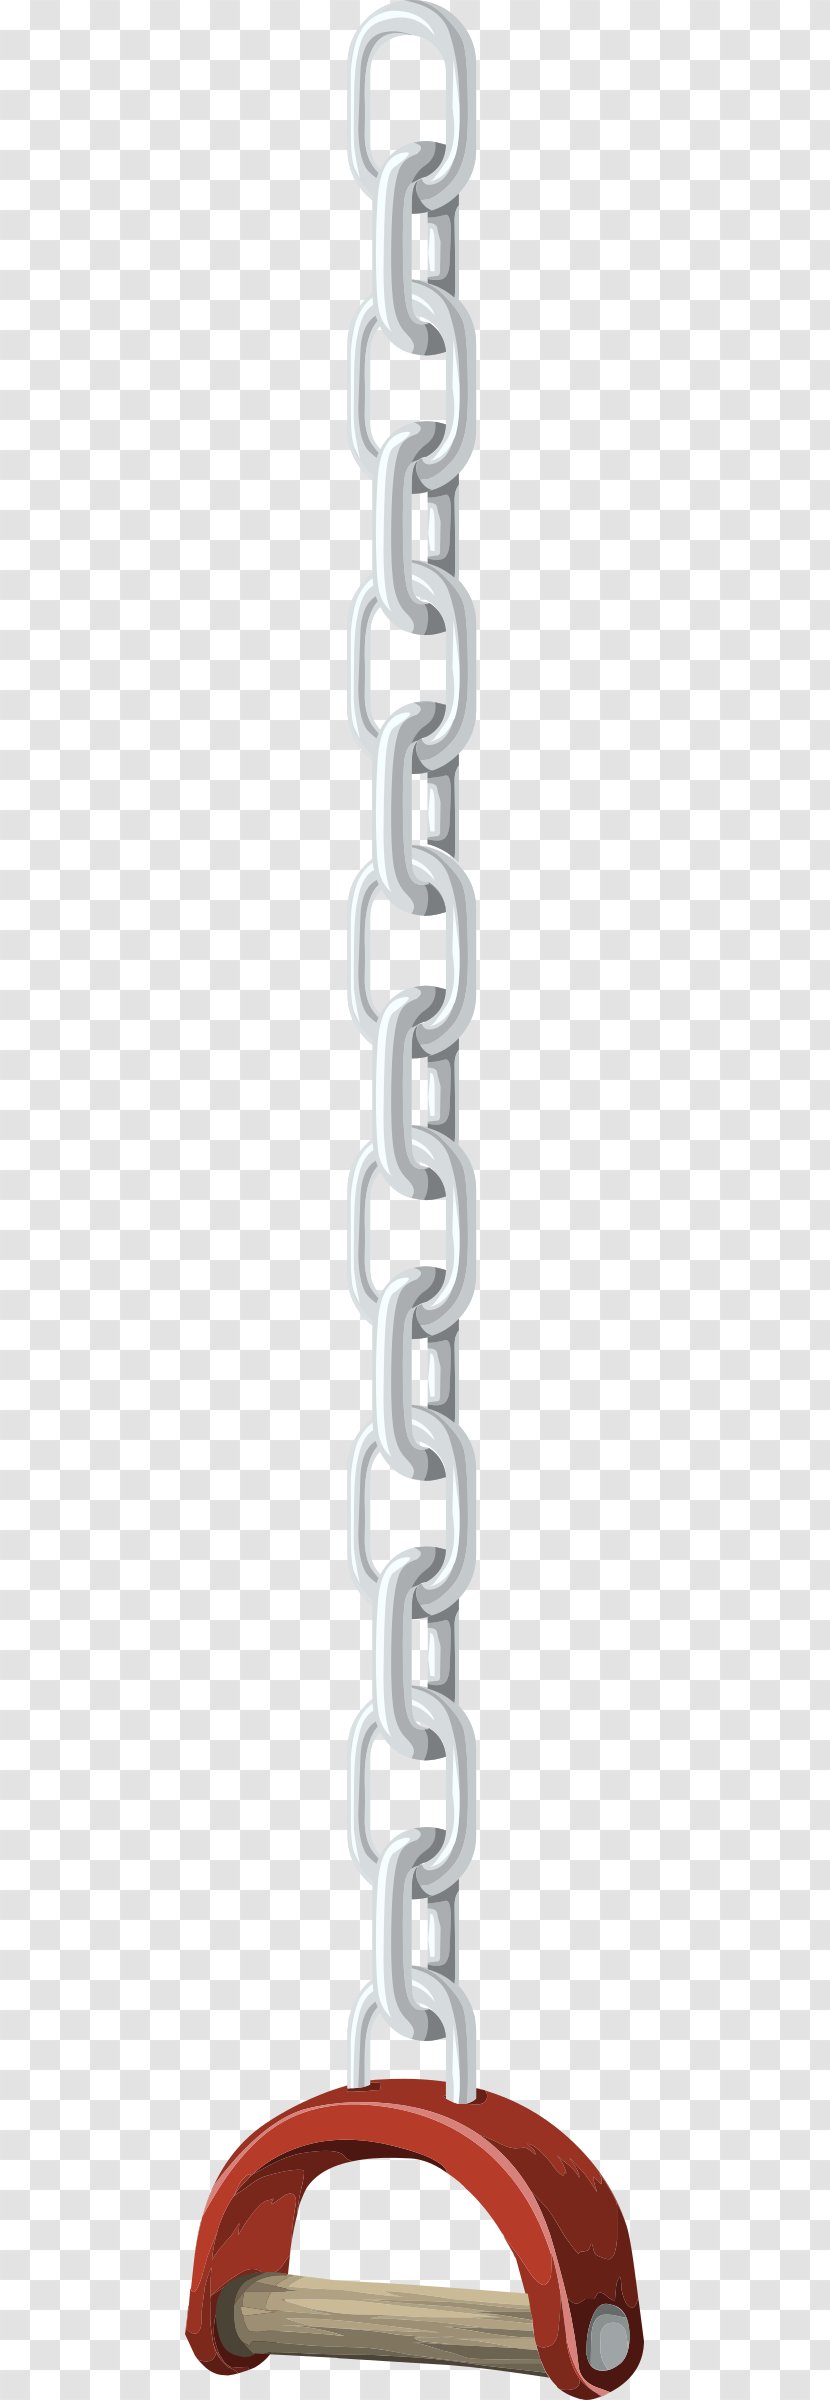 Chain Clip Art - Small Engines Transparent PNG